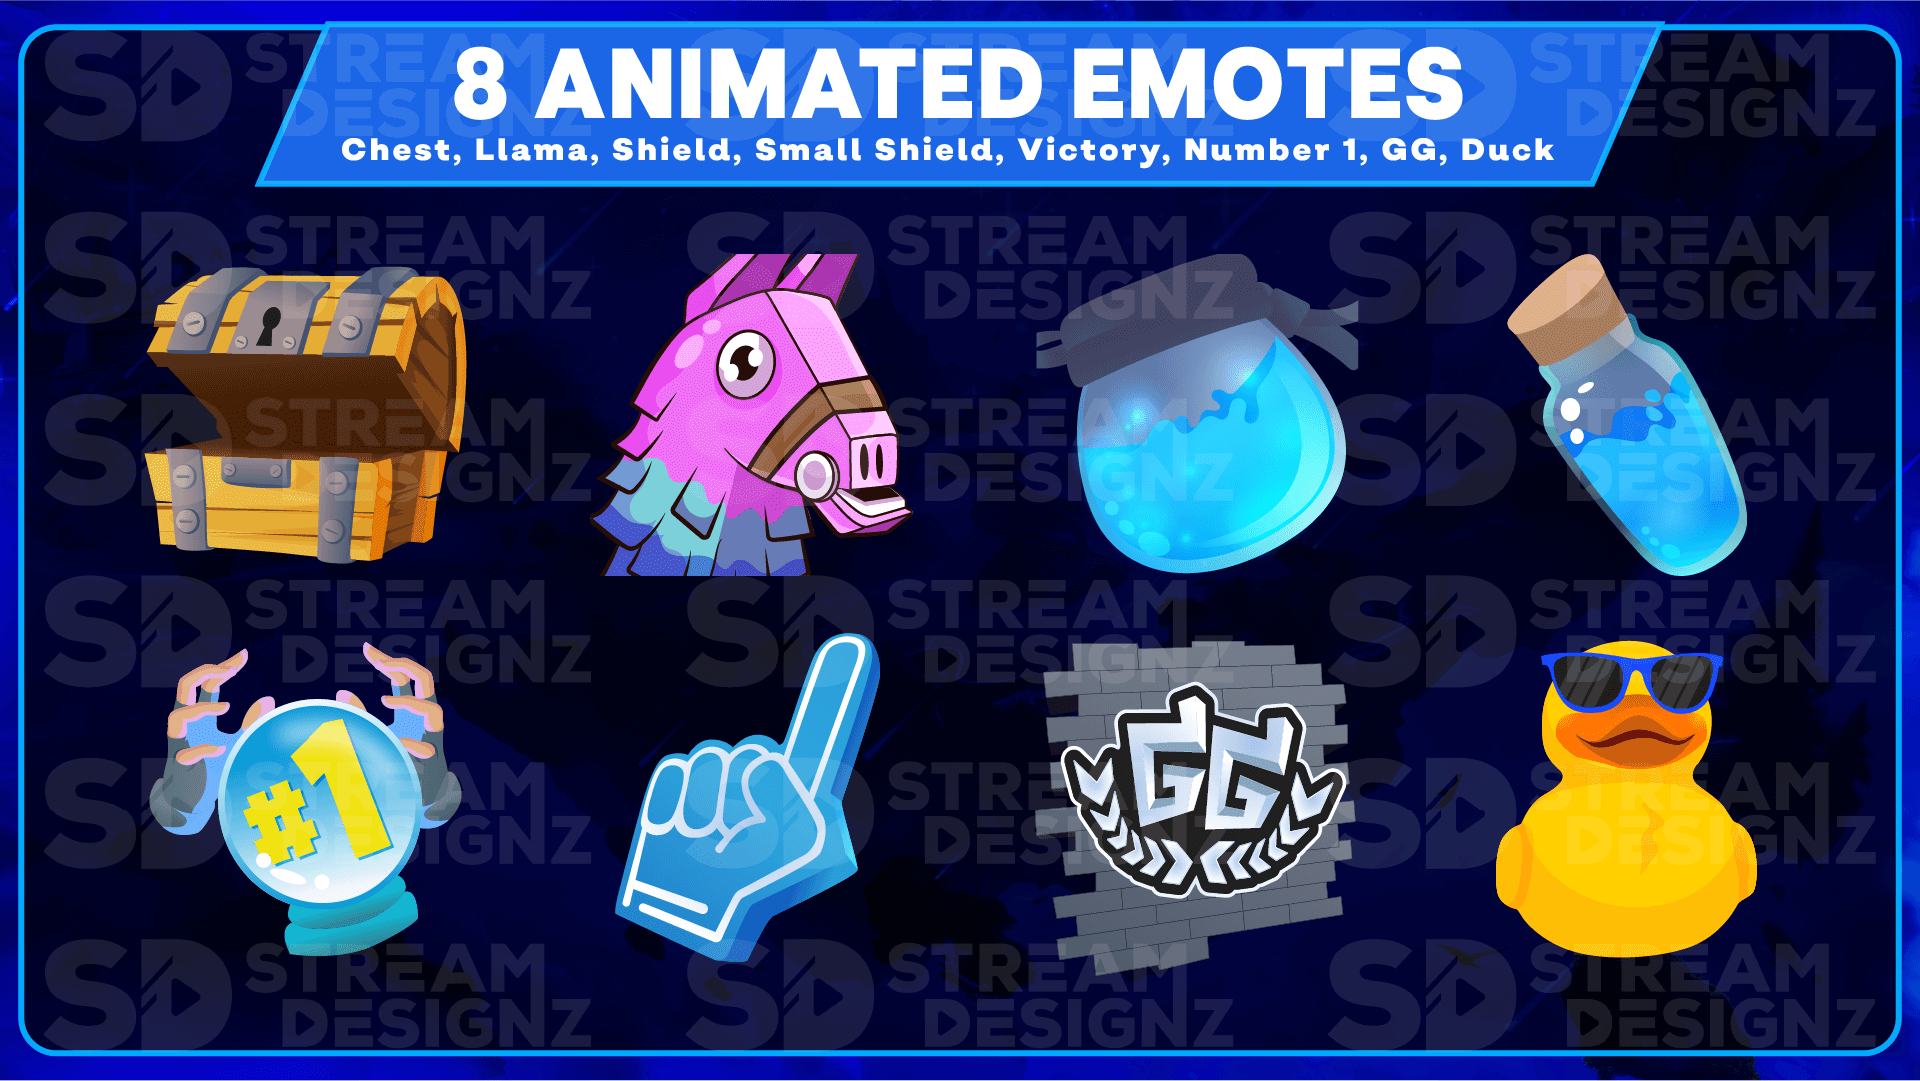 Ultimate stream package 8 animated emotes royale stream designz